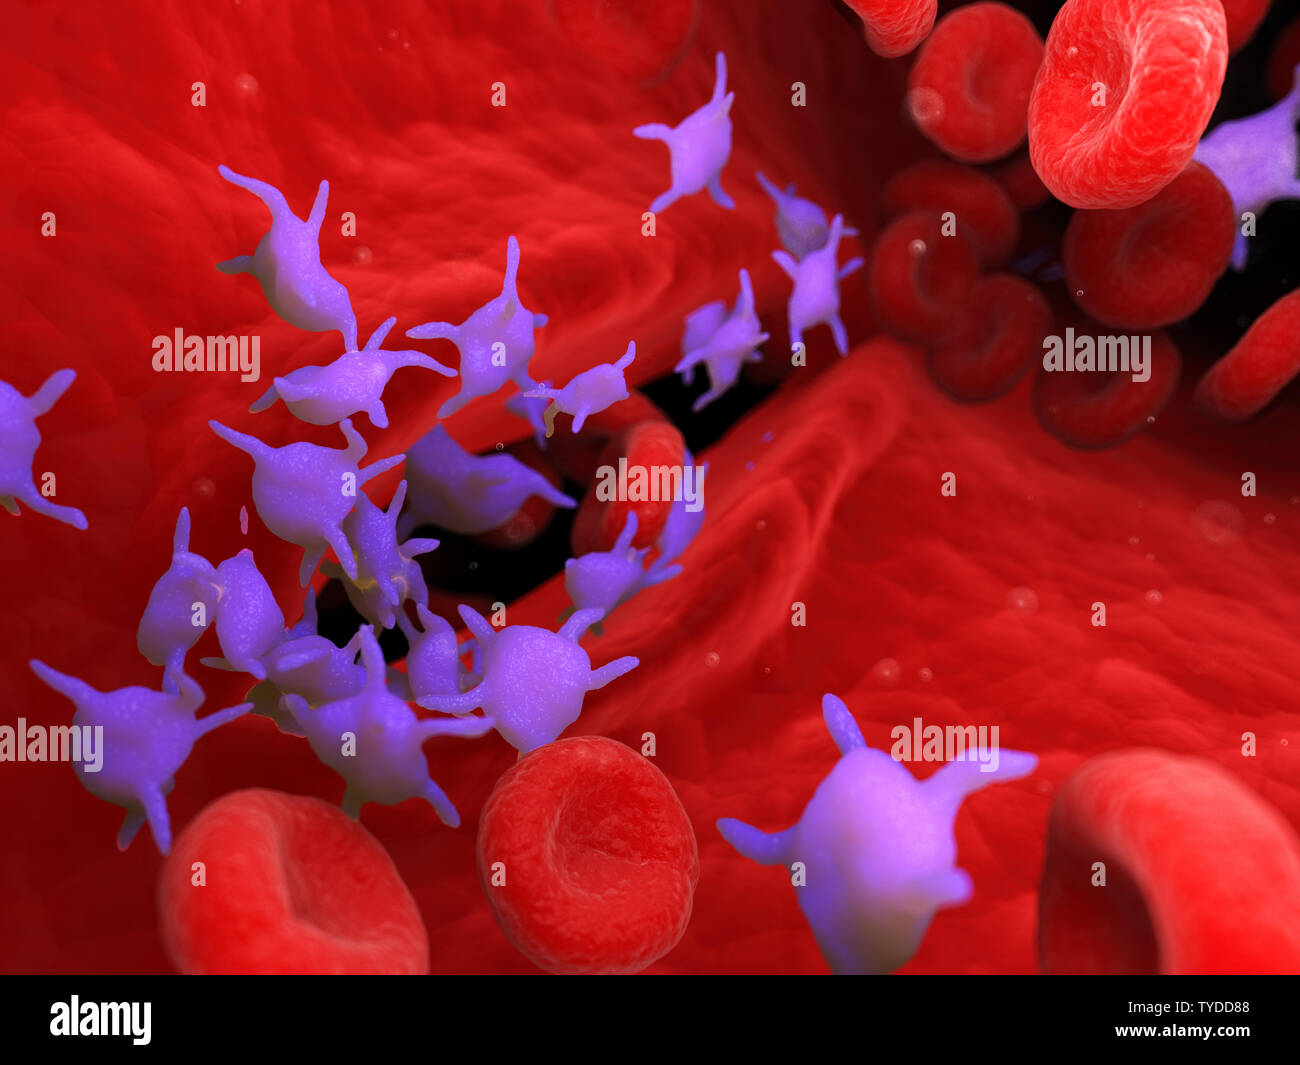 3d rendered medically accurate illustration of active blood platelets Stock Photo